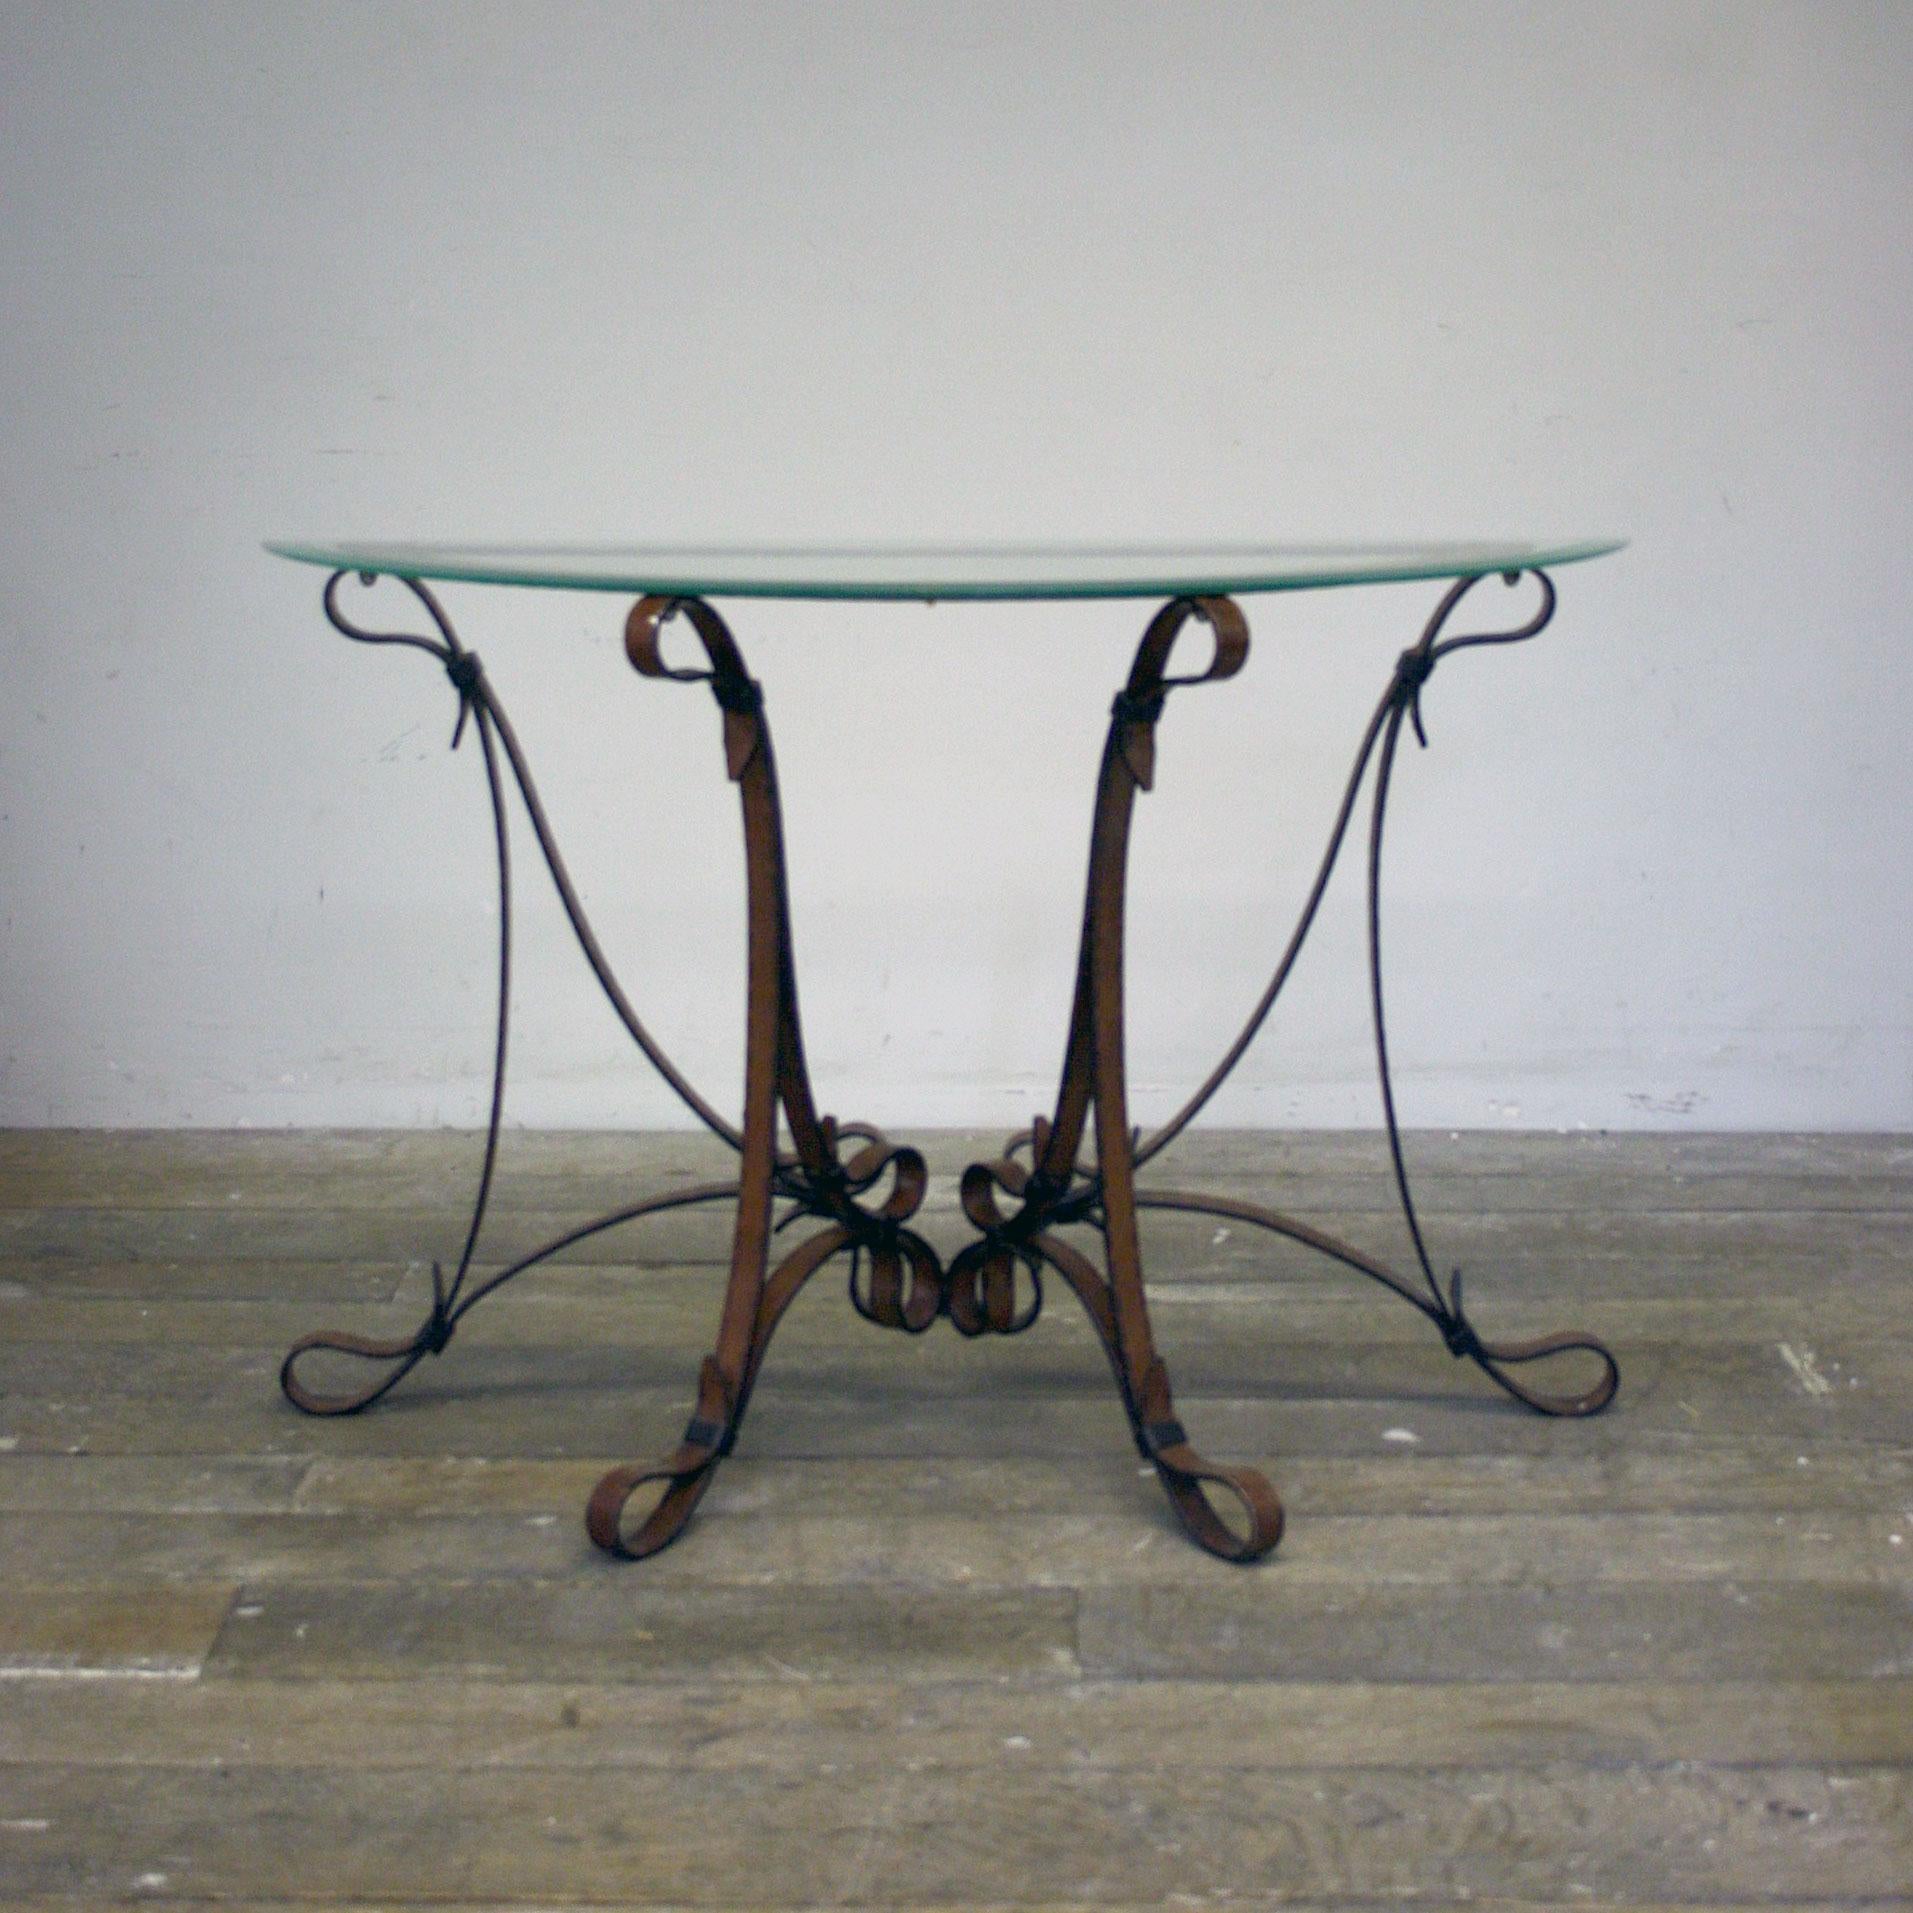 This amazing late 20th century Faux leather metal demi lame console table with glass top has all the signature details as per Hermes and Jacques Adnet, Equestrian leather straps, rings and buckles, all giving the appearance of horse reins, the